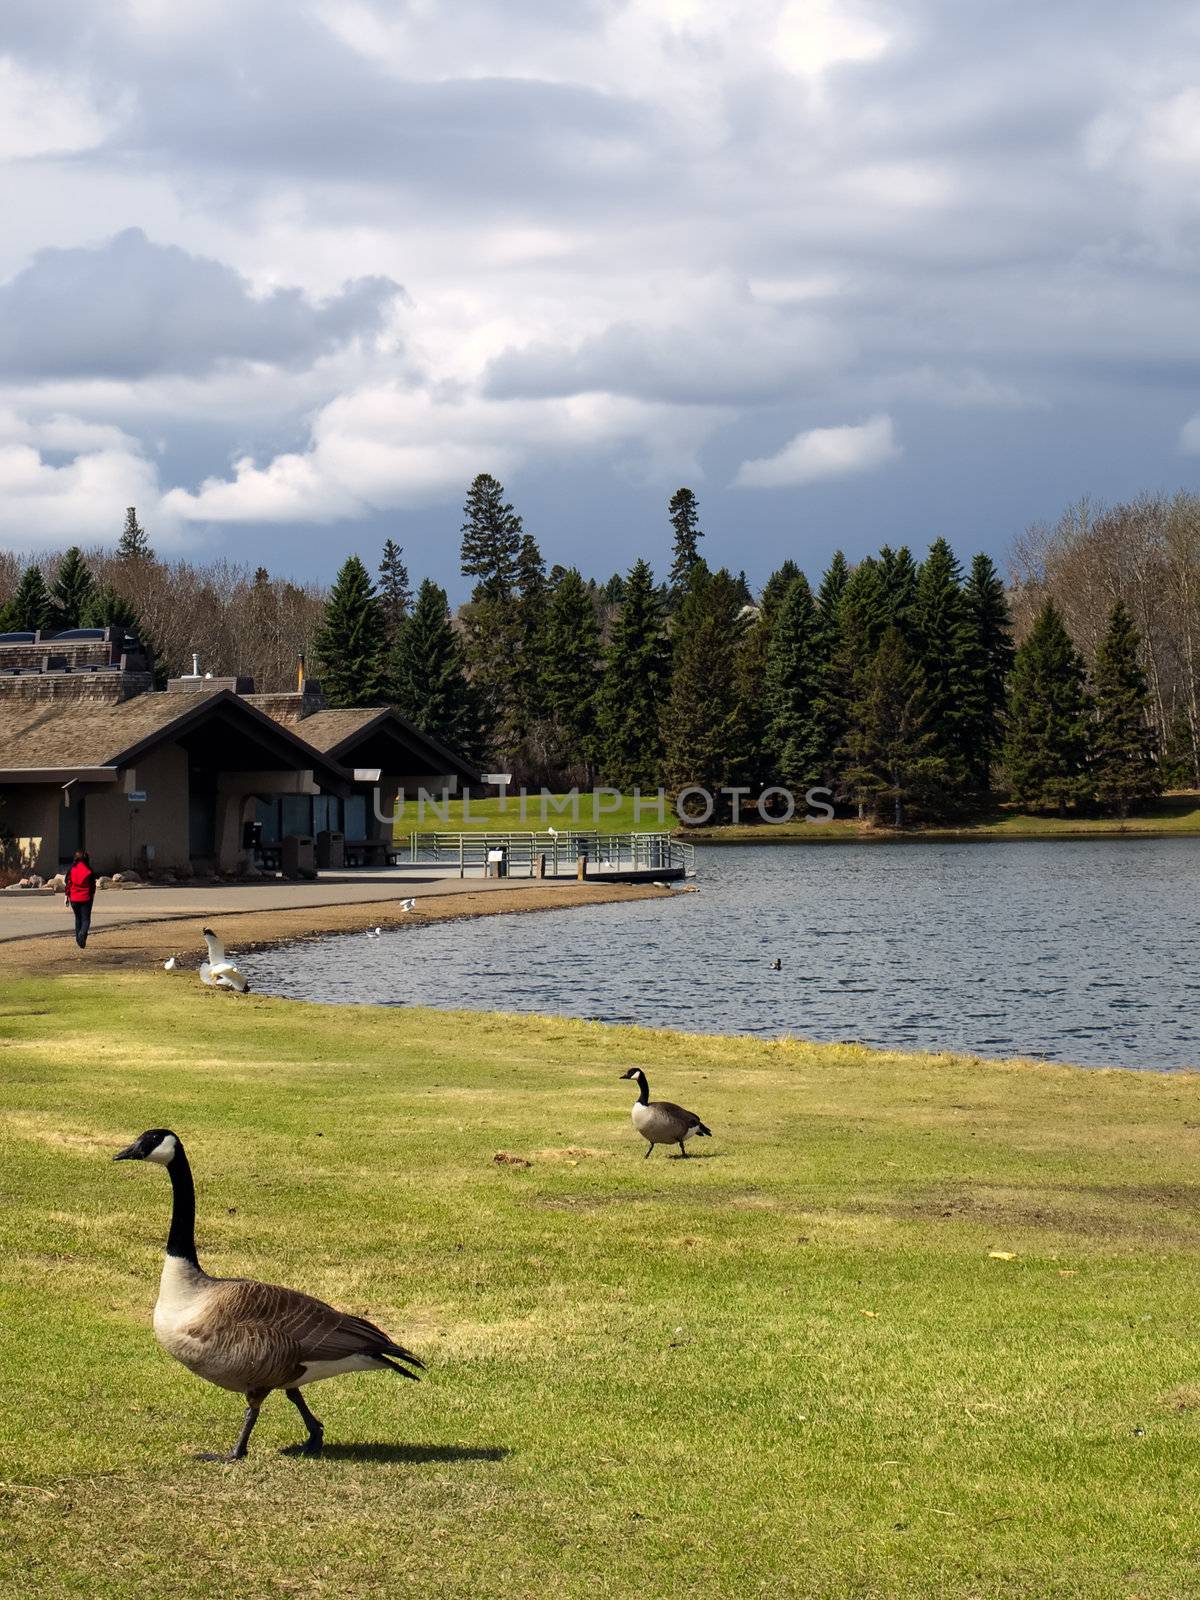 Canadian Geese in a Park by watamyr